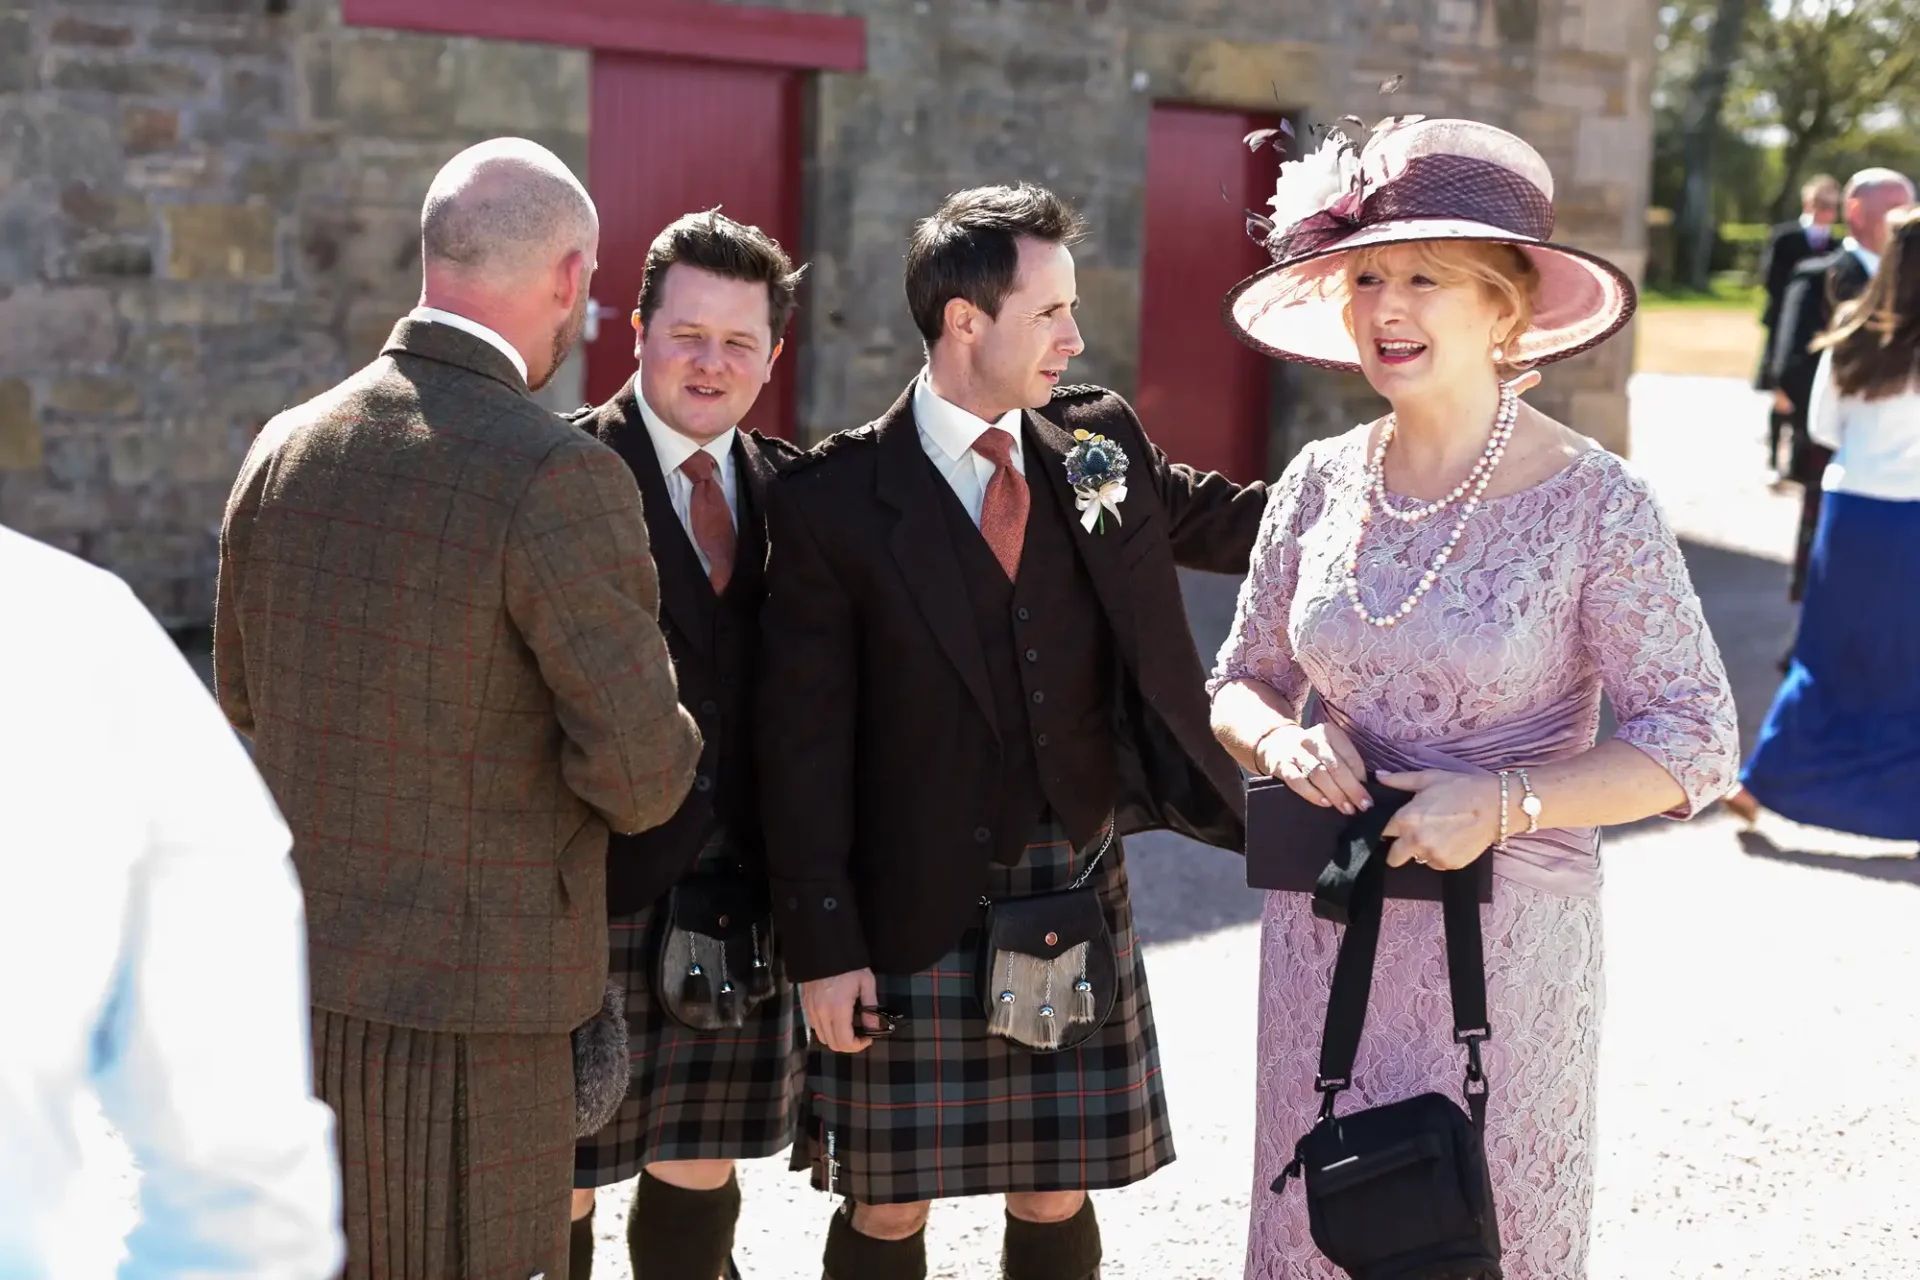 Group of people in formal attire including kilts, conversing outdoors at a sunny event, with a woman in a hat smiling broadly.